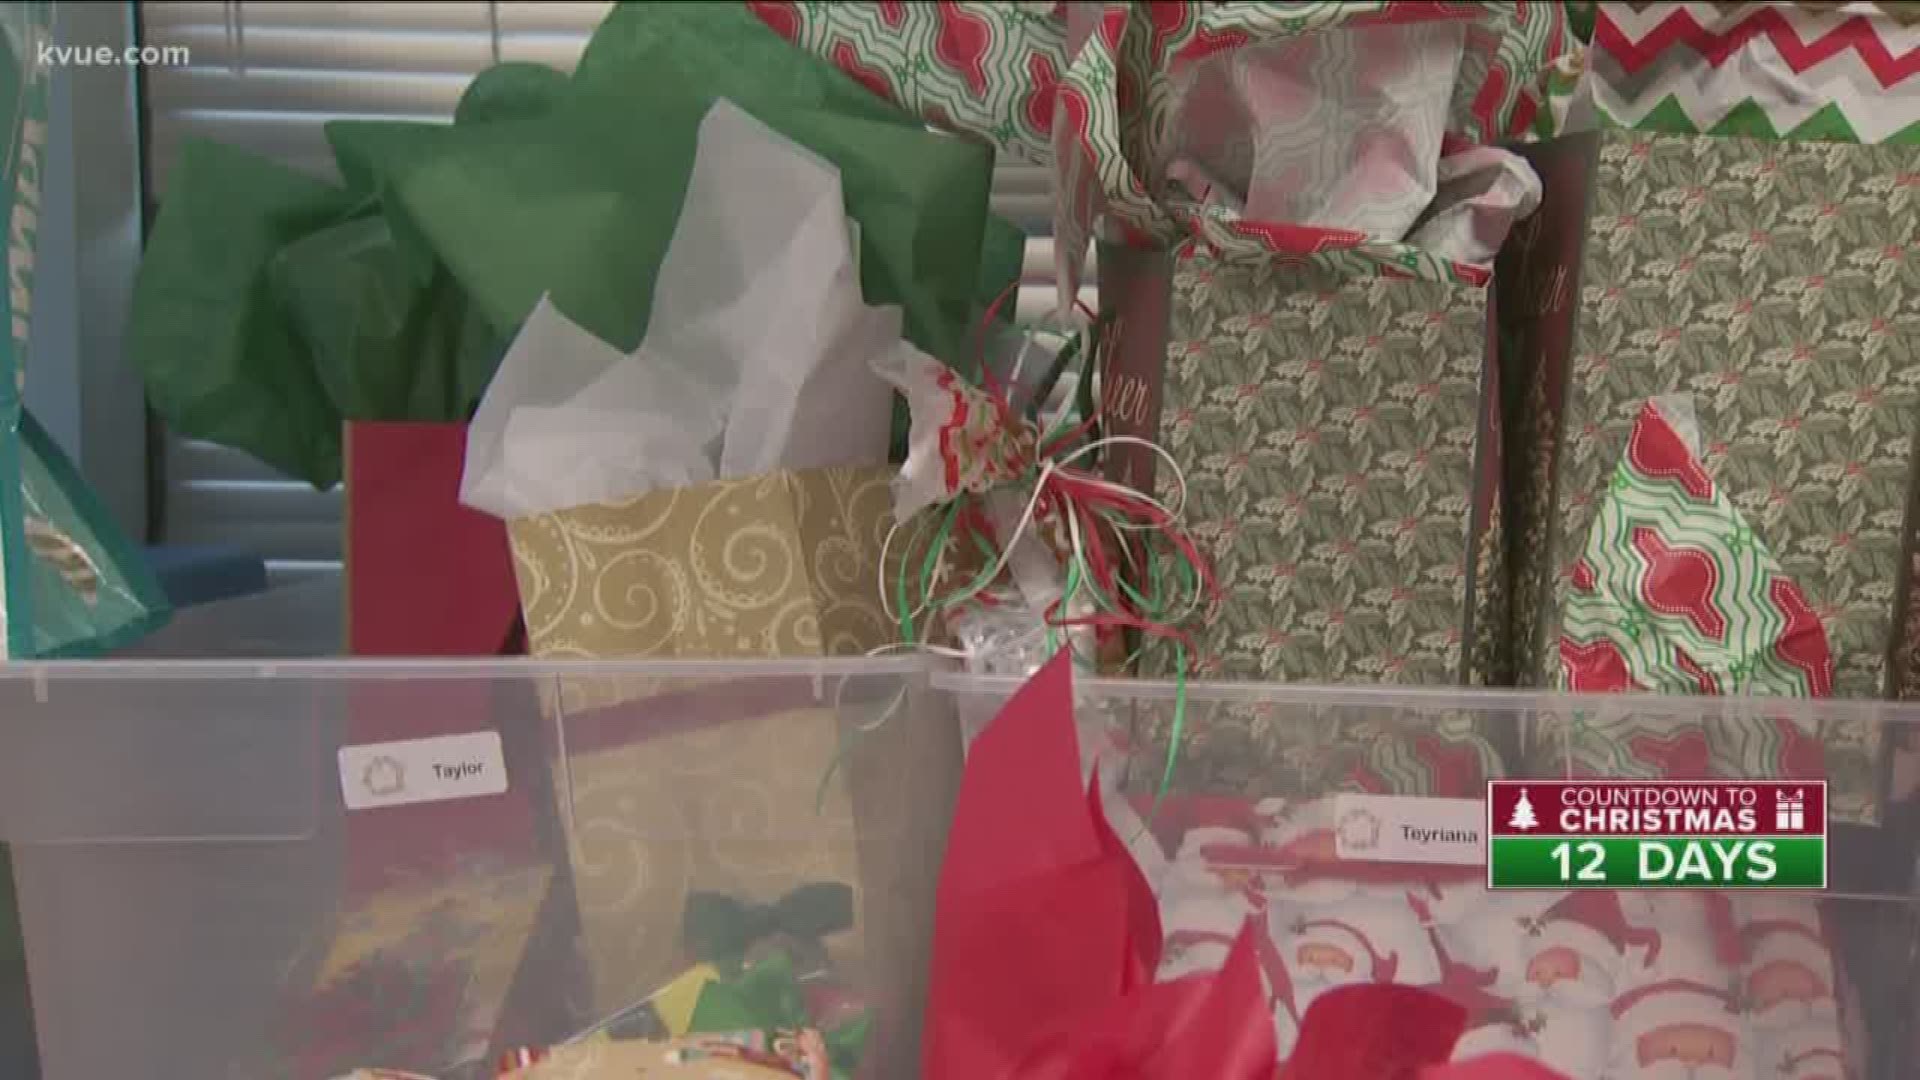 Their CPS caseworkers asked them what their dream Christmas wish list would be, and as a surprise, the non-profit Foster Angels made those wish lists come true for nearly 150 teenagers in foster care in Central Texas.